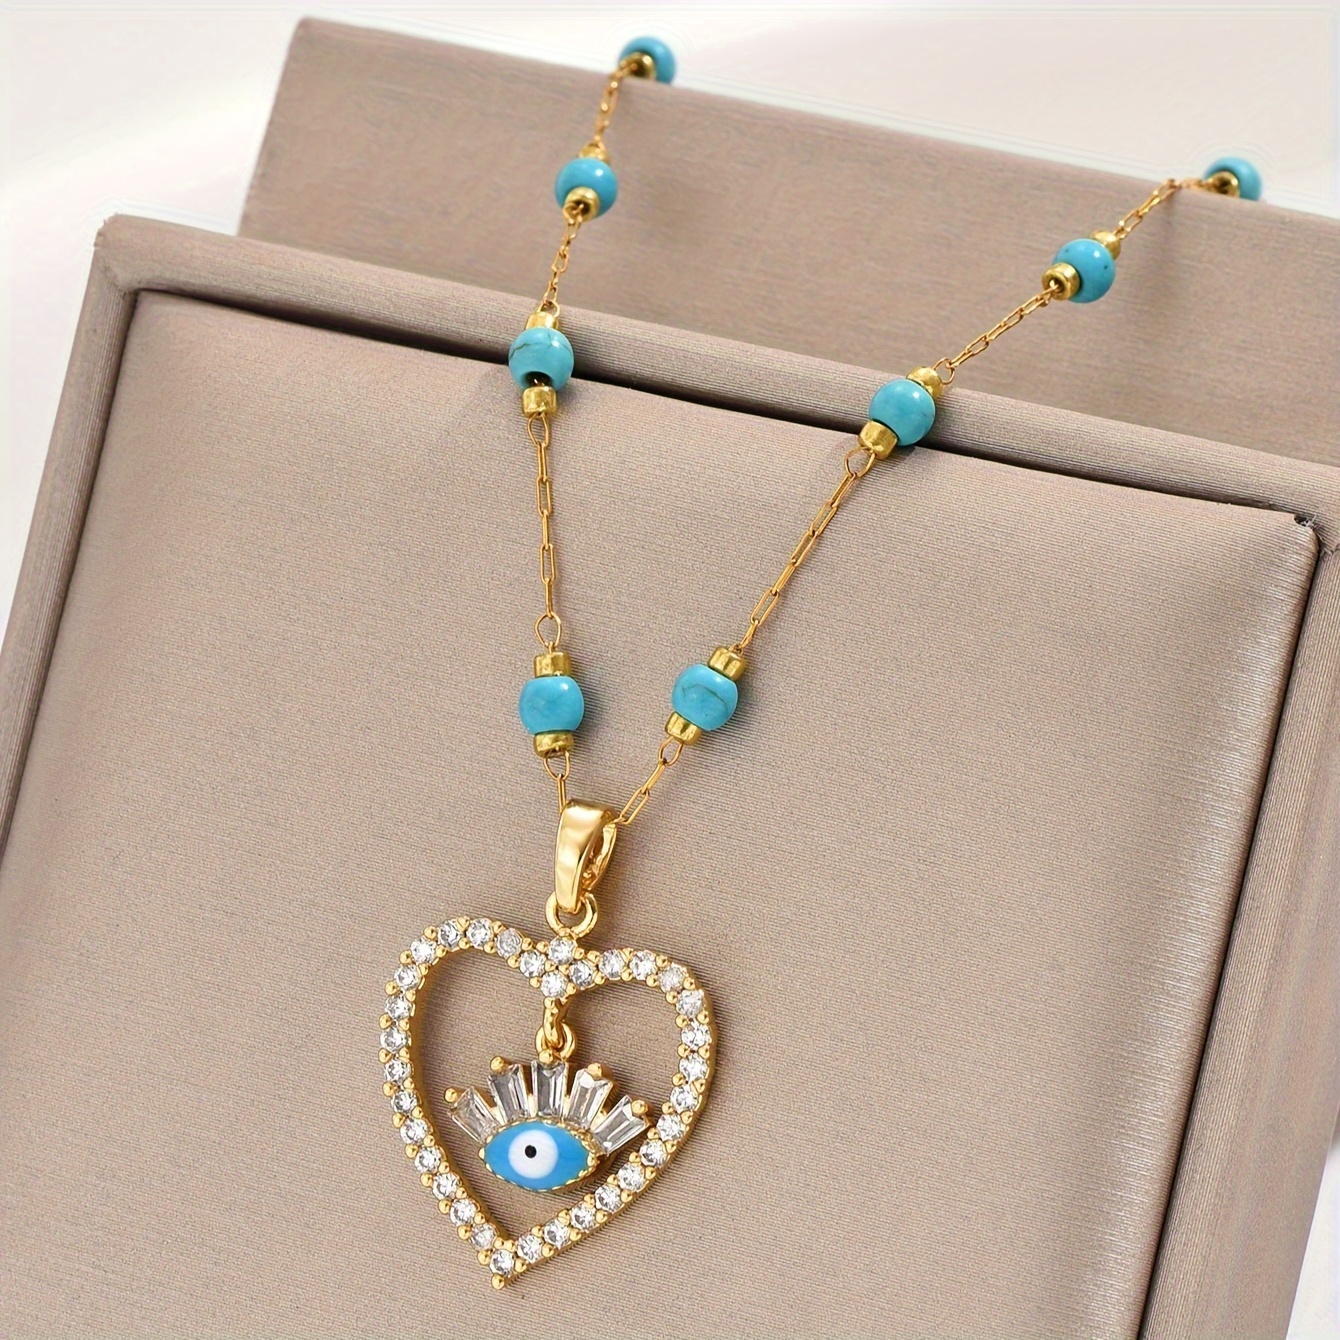 

1pc Golden Stainless Steel Necklace With Heart-shaped Blue Eye Pendant, Rhinestone Pendant Necklace, Suitable For Men And Women